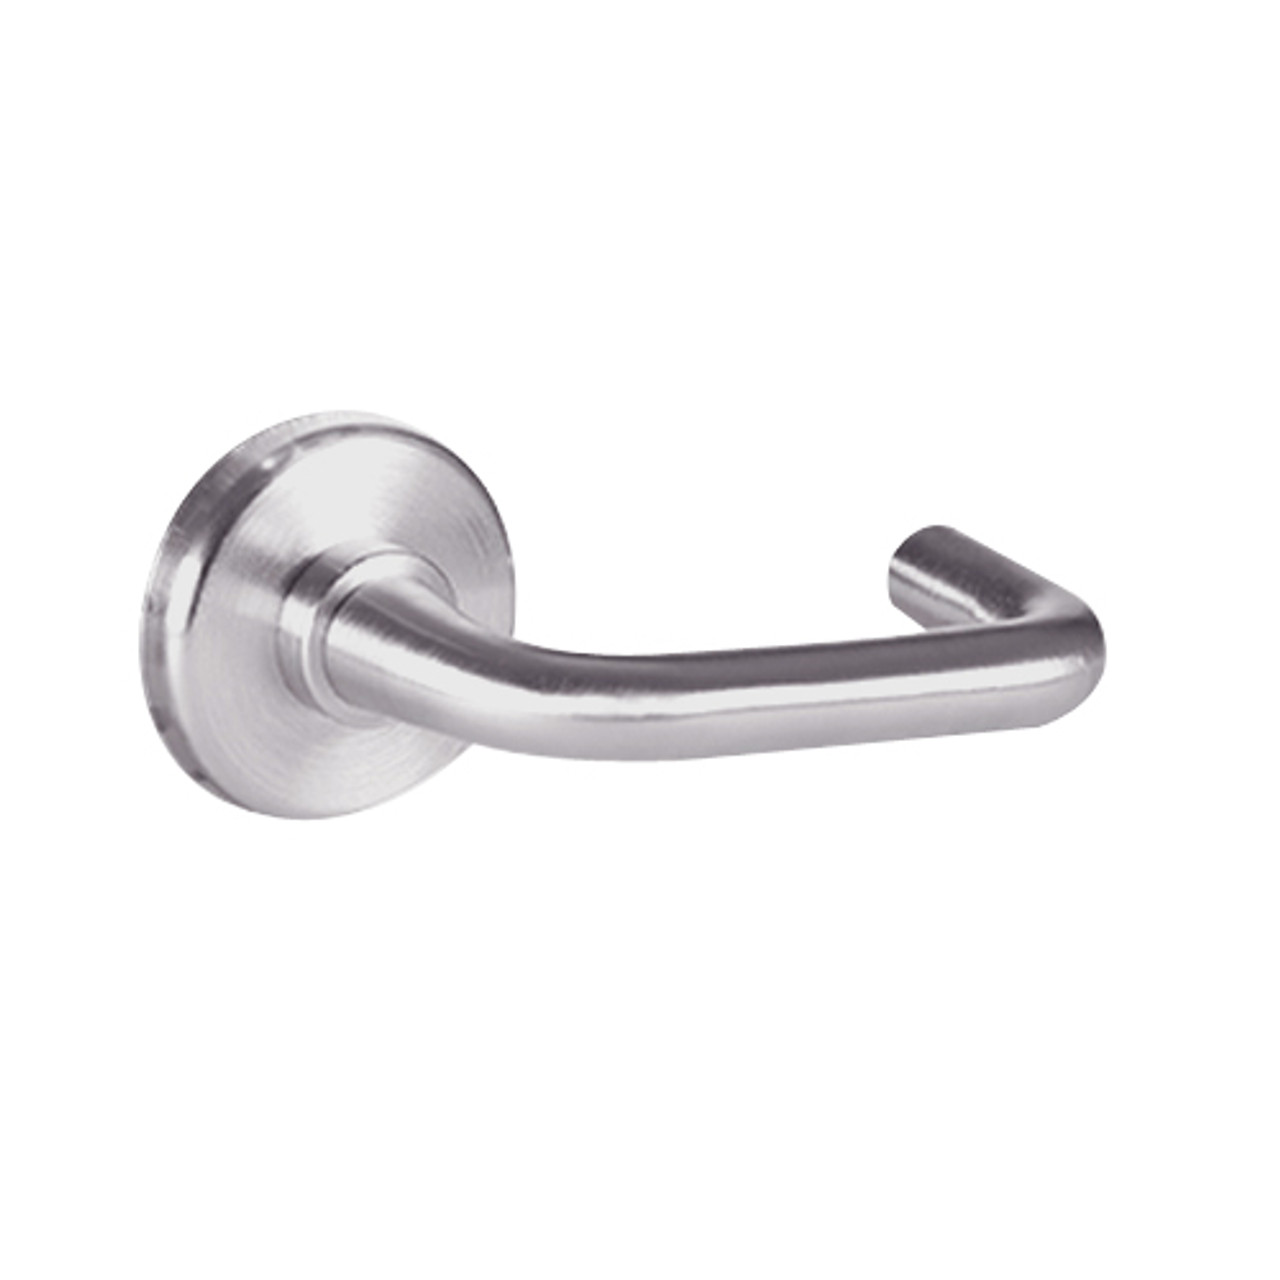 40HTKIS13H630 Best 40H Series Trim Kits Inside Lever Only with Solid Tube-Return Trim Style in Satin Stainless Steel